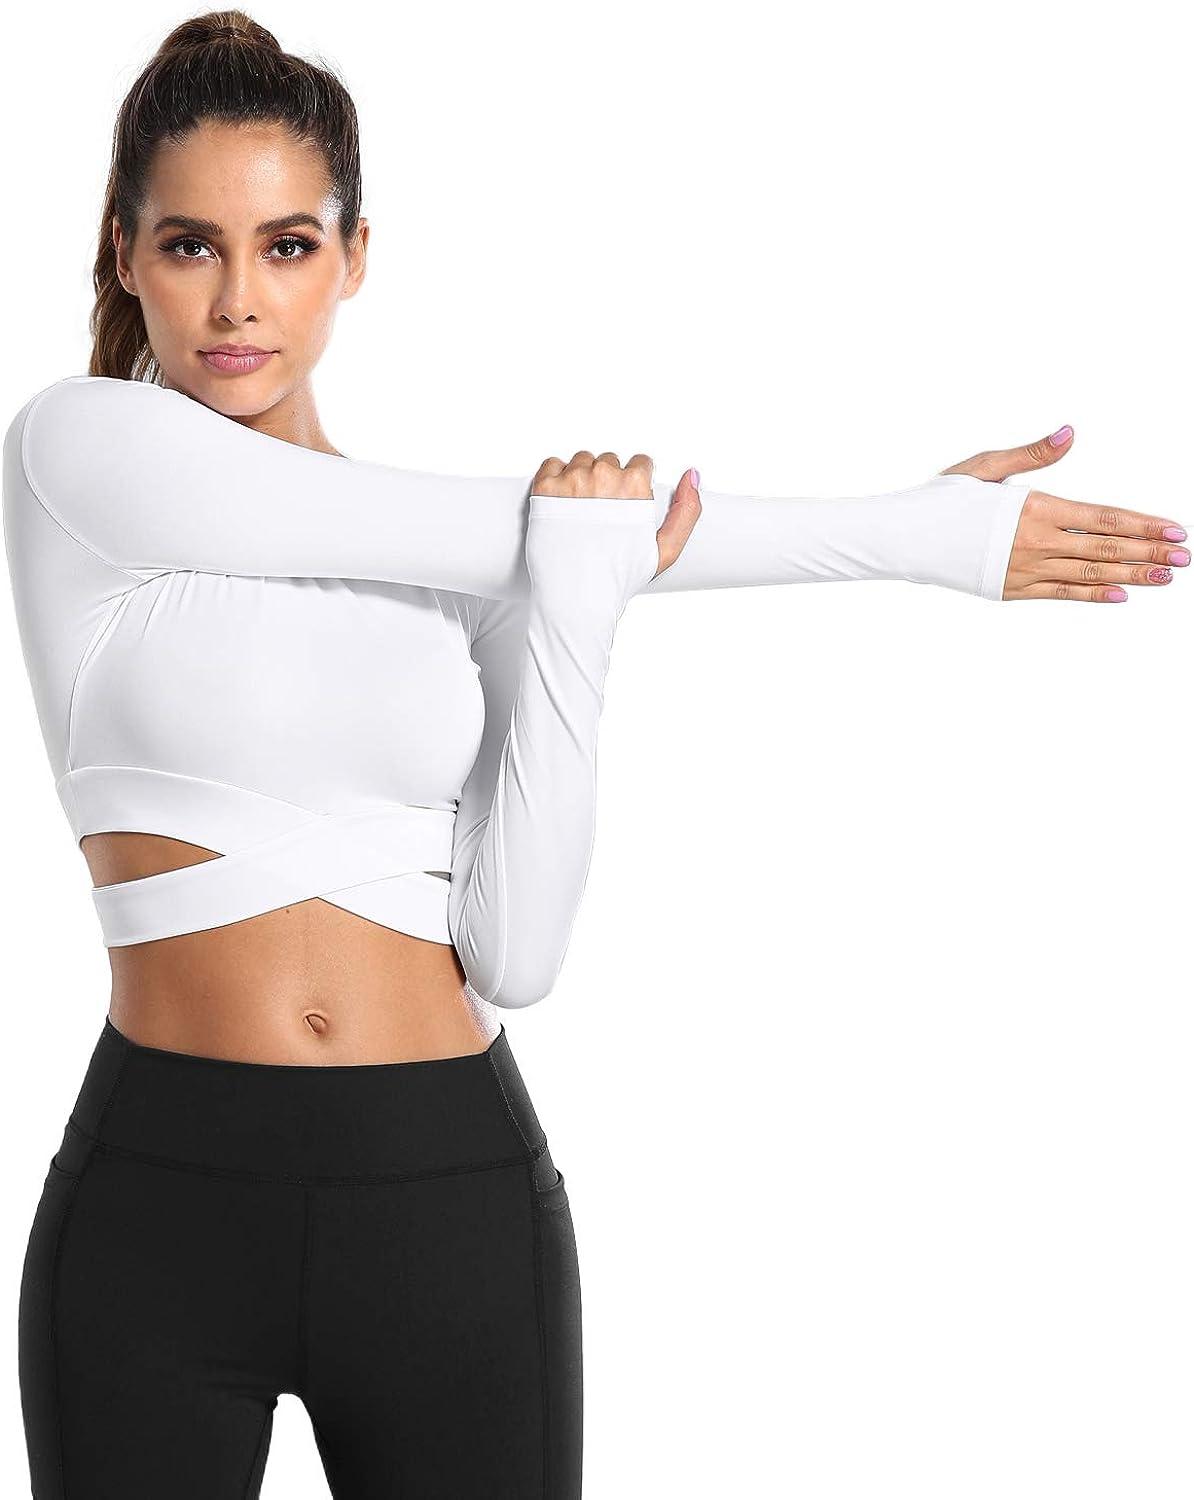 YHWW Yoga Clothes,Women Gym Yoga Crop Tops Sexy Exposed Navel Yoga Shirts  Long Sleeve Workout Tops Fitness Running Sport Shirts Sportswear,White